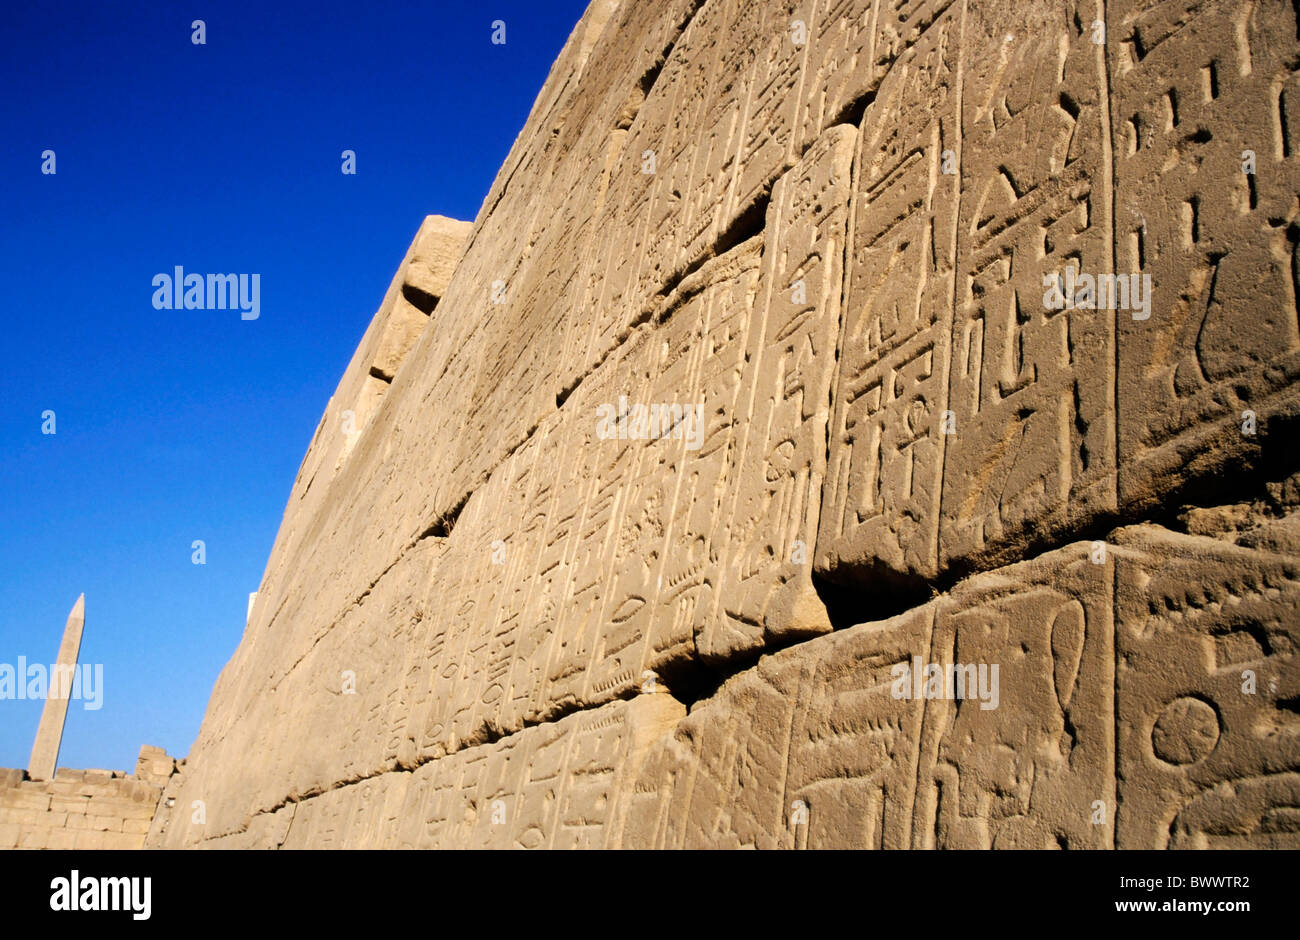 Wall full of hieroglyphs and an obelisk at the Karnak Temple Complex in Luxor, Egypt. Stock Photo